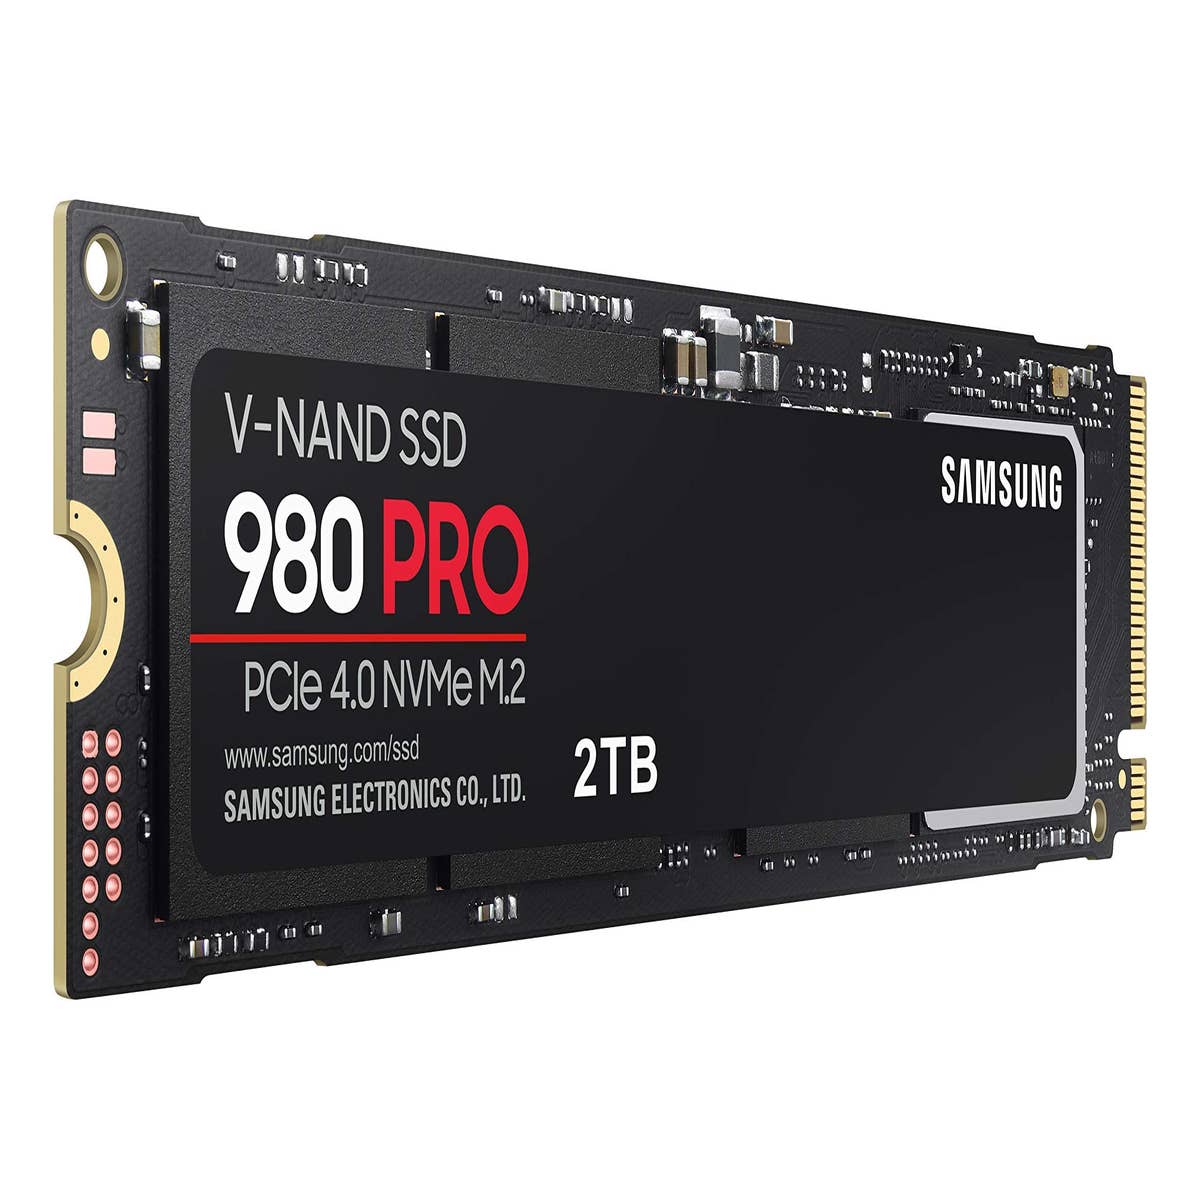 Samsung's 980 PRO SSD hits unbeatable low: Save nearly $100 on the ultimate  storage upgrade